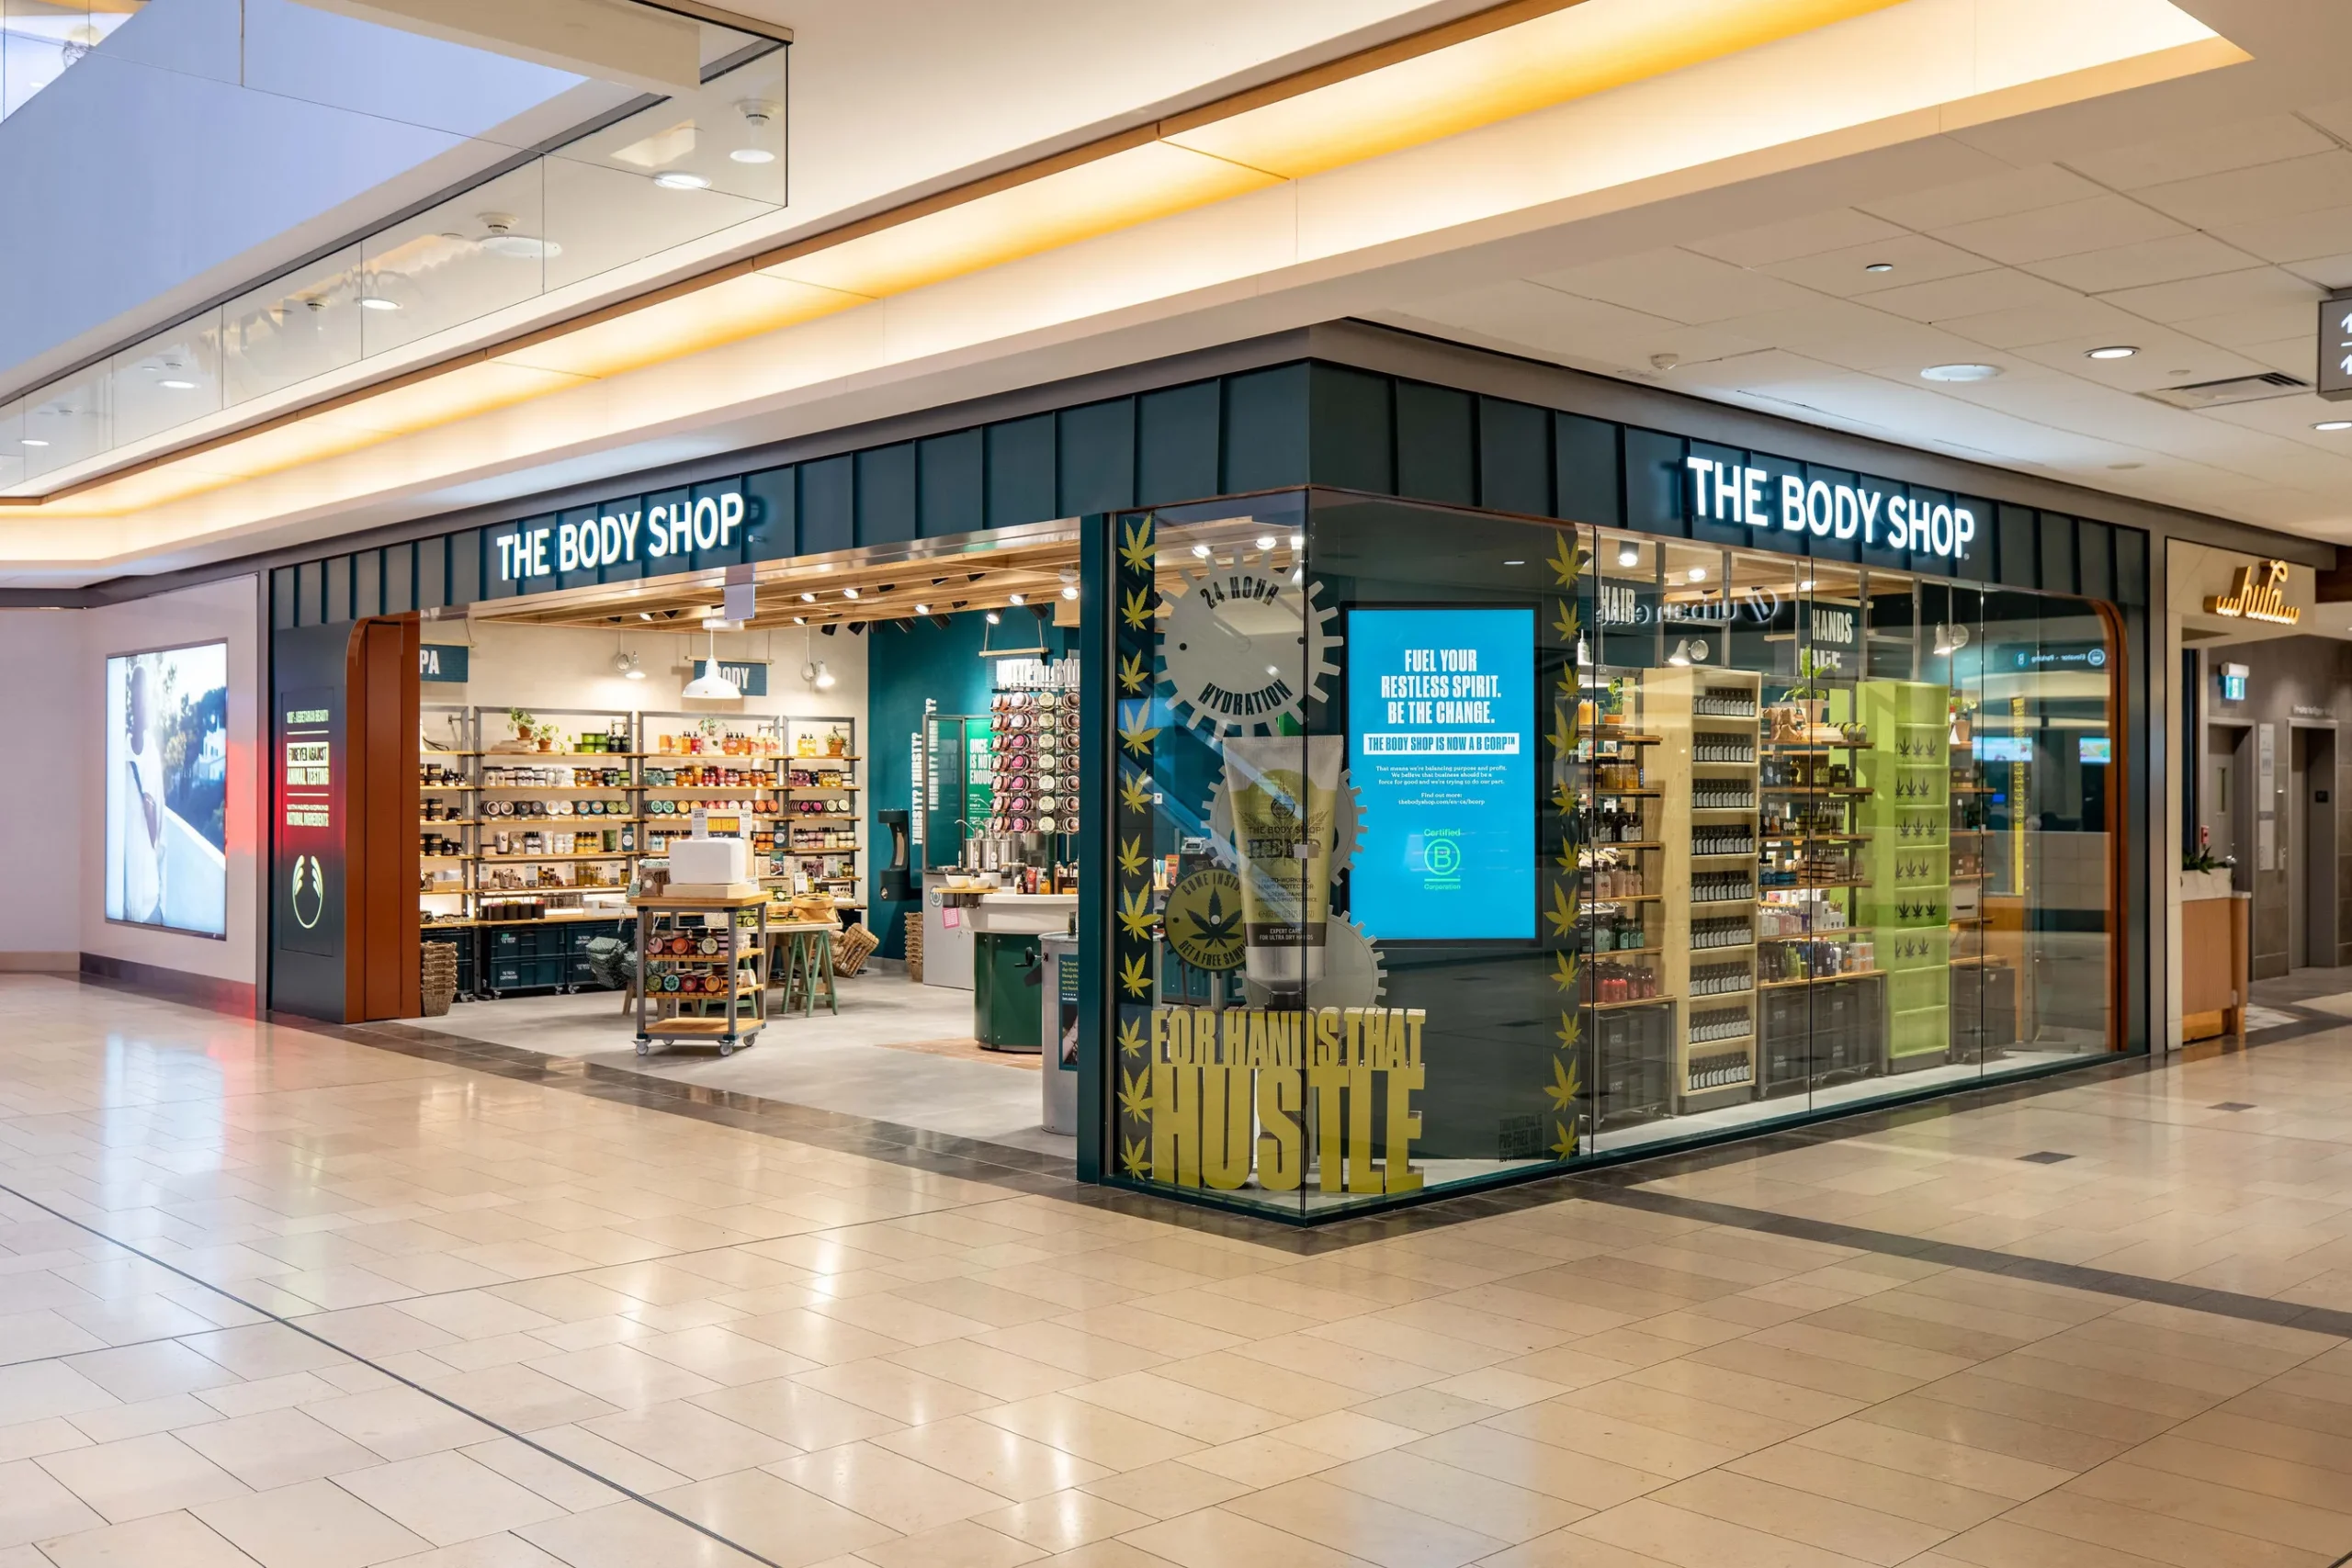 Beauty Giant's US Exit: The Body Shop Shuts Doors, Sparks Talks on Ethical Shopping's Future